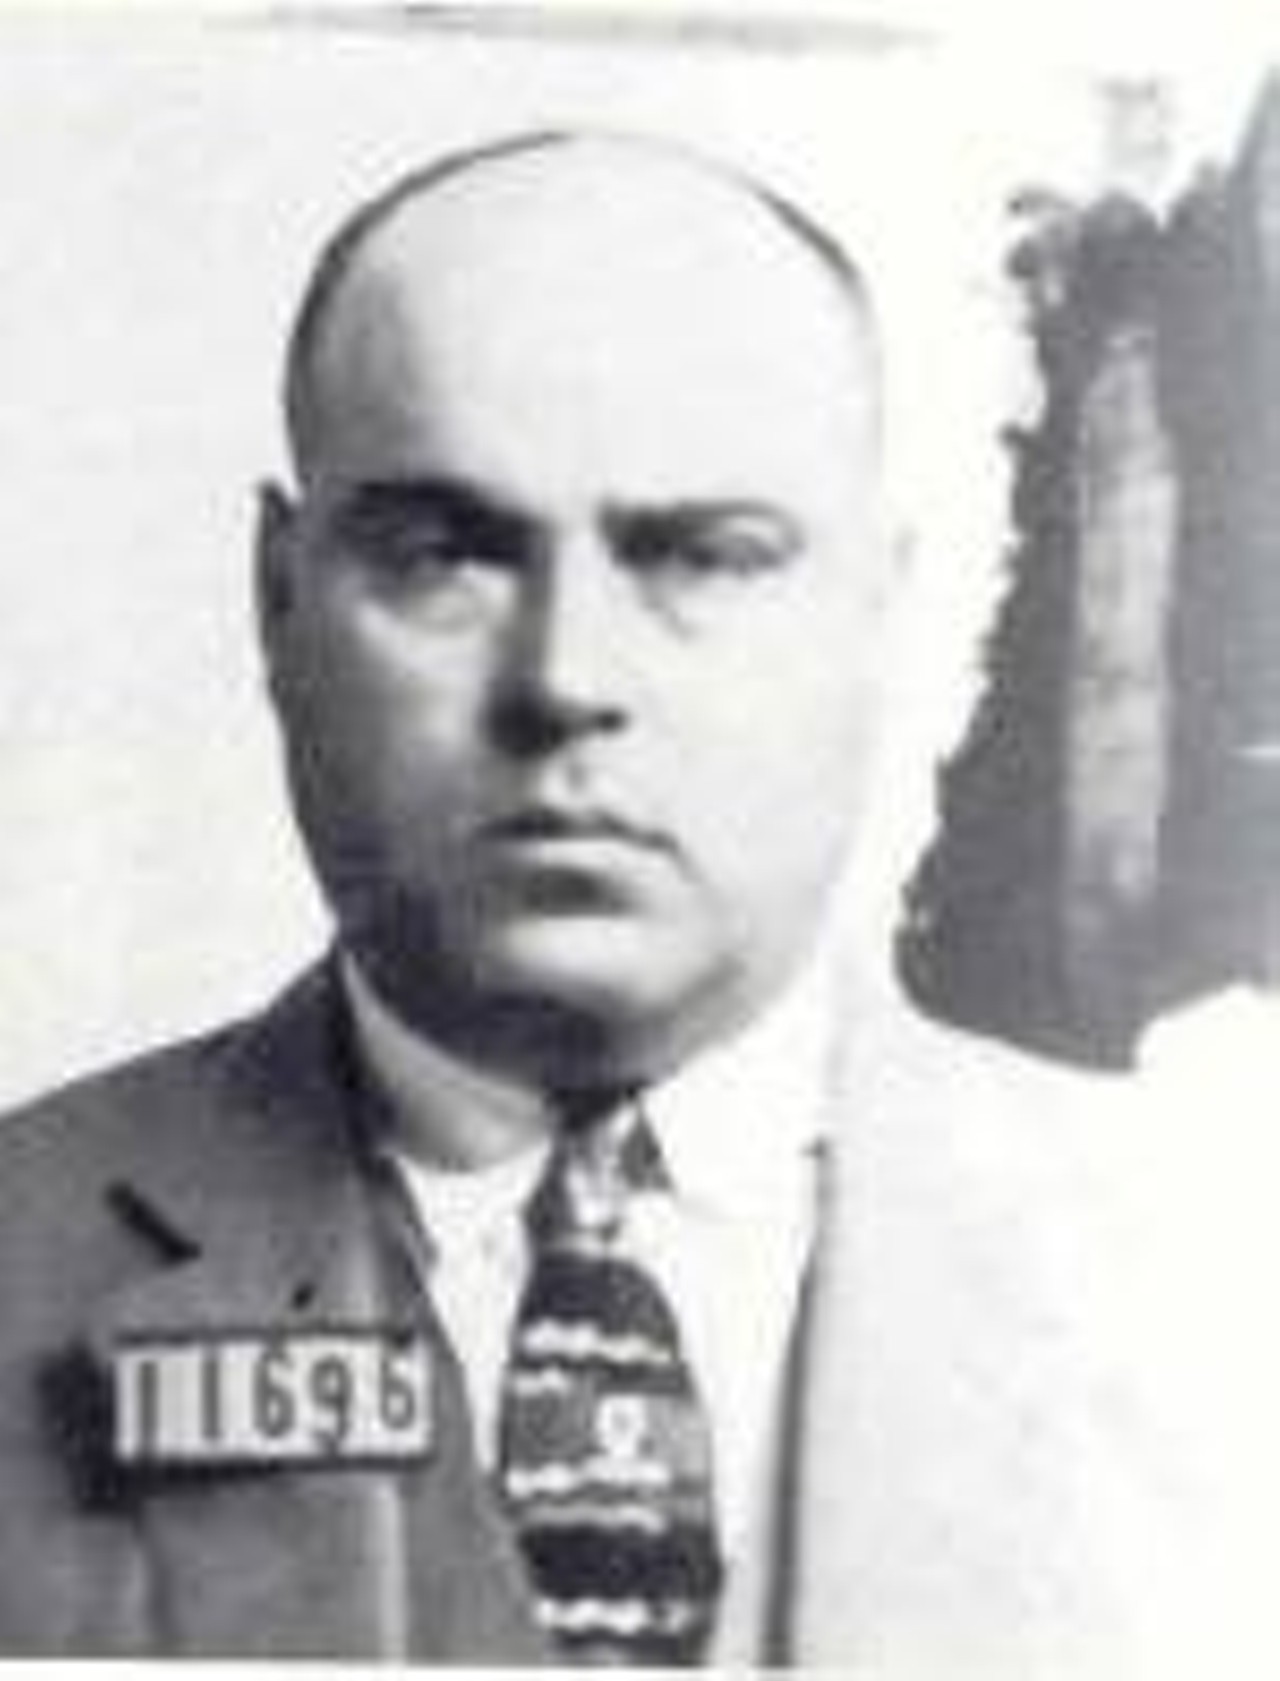 Frank Milano - A shrewd and cunning individual, he operated out of the Little Italy section of Cleveland. His brother Tony would serve as top enforcer and representative. Frank Milano grab ahold of everything-sports betting, loansharking, fraud and every other possible crime. Milano was recognized as the first La Cosa Nostra boss of Cleveland. He was given a seat on the Commission. In 1935 he slipped into Mexico, fleeing from an income tax indictment, receiving immigration in 1942 and died of natural causes on September 15, 1970 from natural causes at a Los Angeles hospital. He not only led a syndicate of his own but became an influencial element in Los Angeles.